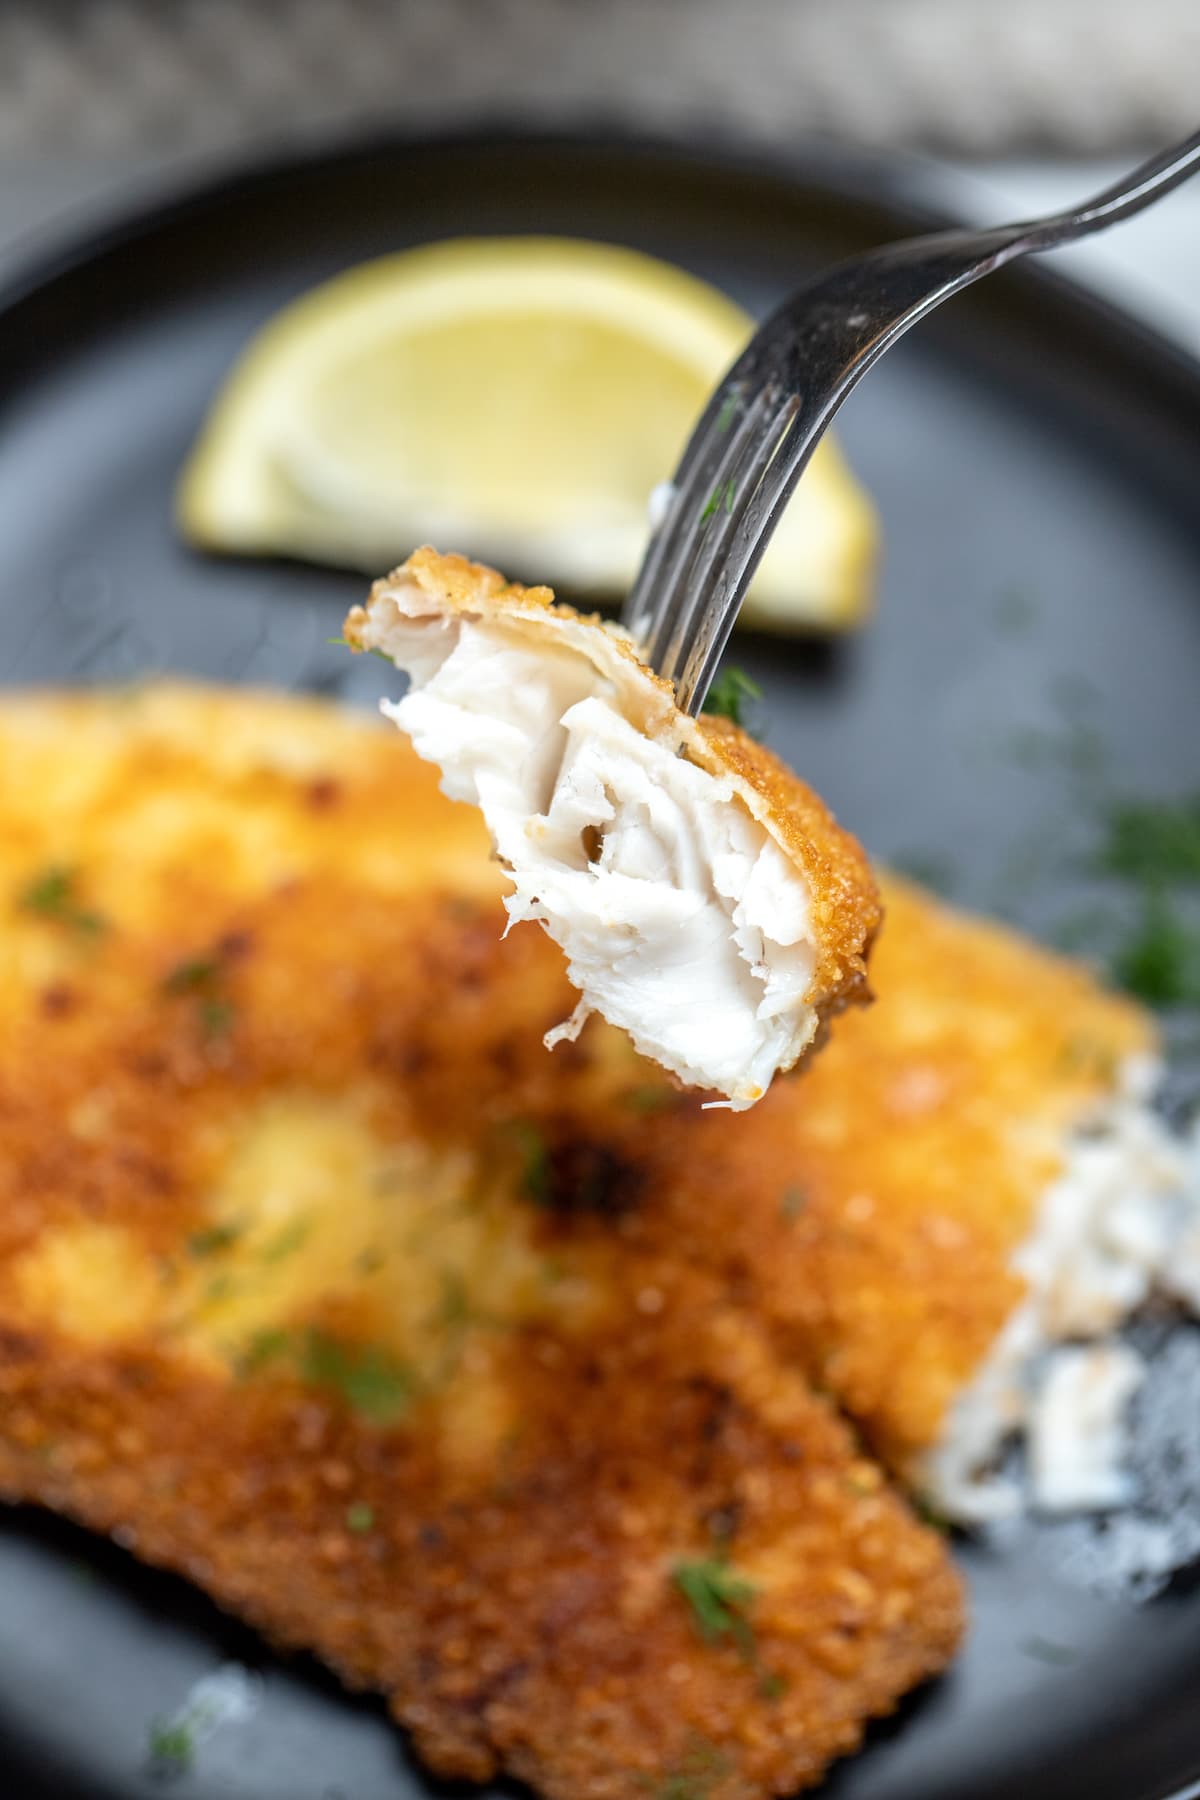 A fork lifting up a flakey piece of parmesan crusted tilapia from a plate with a large filet on it.